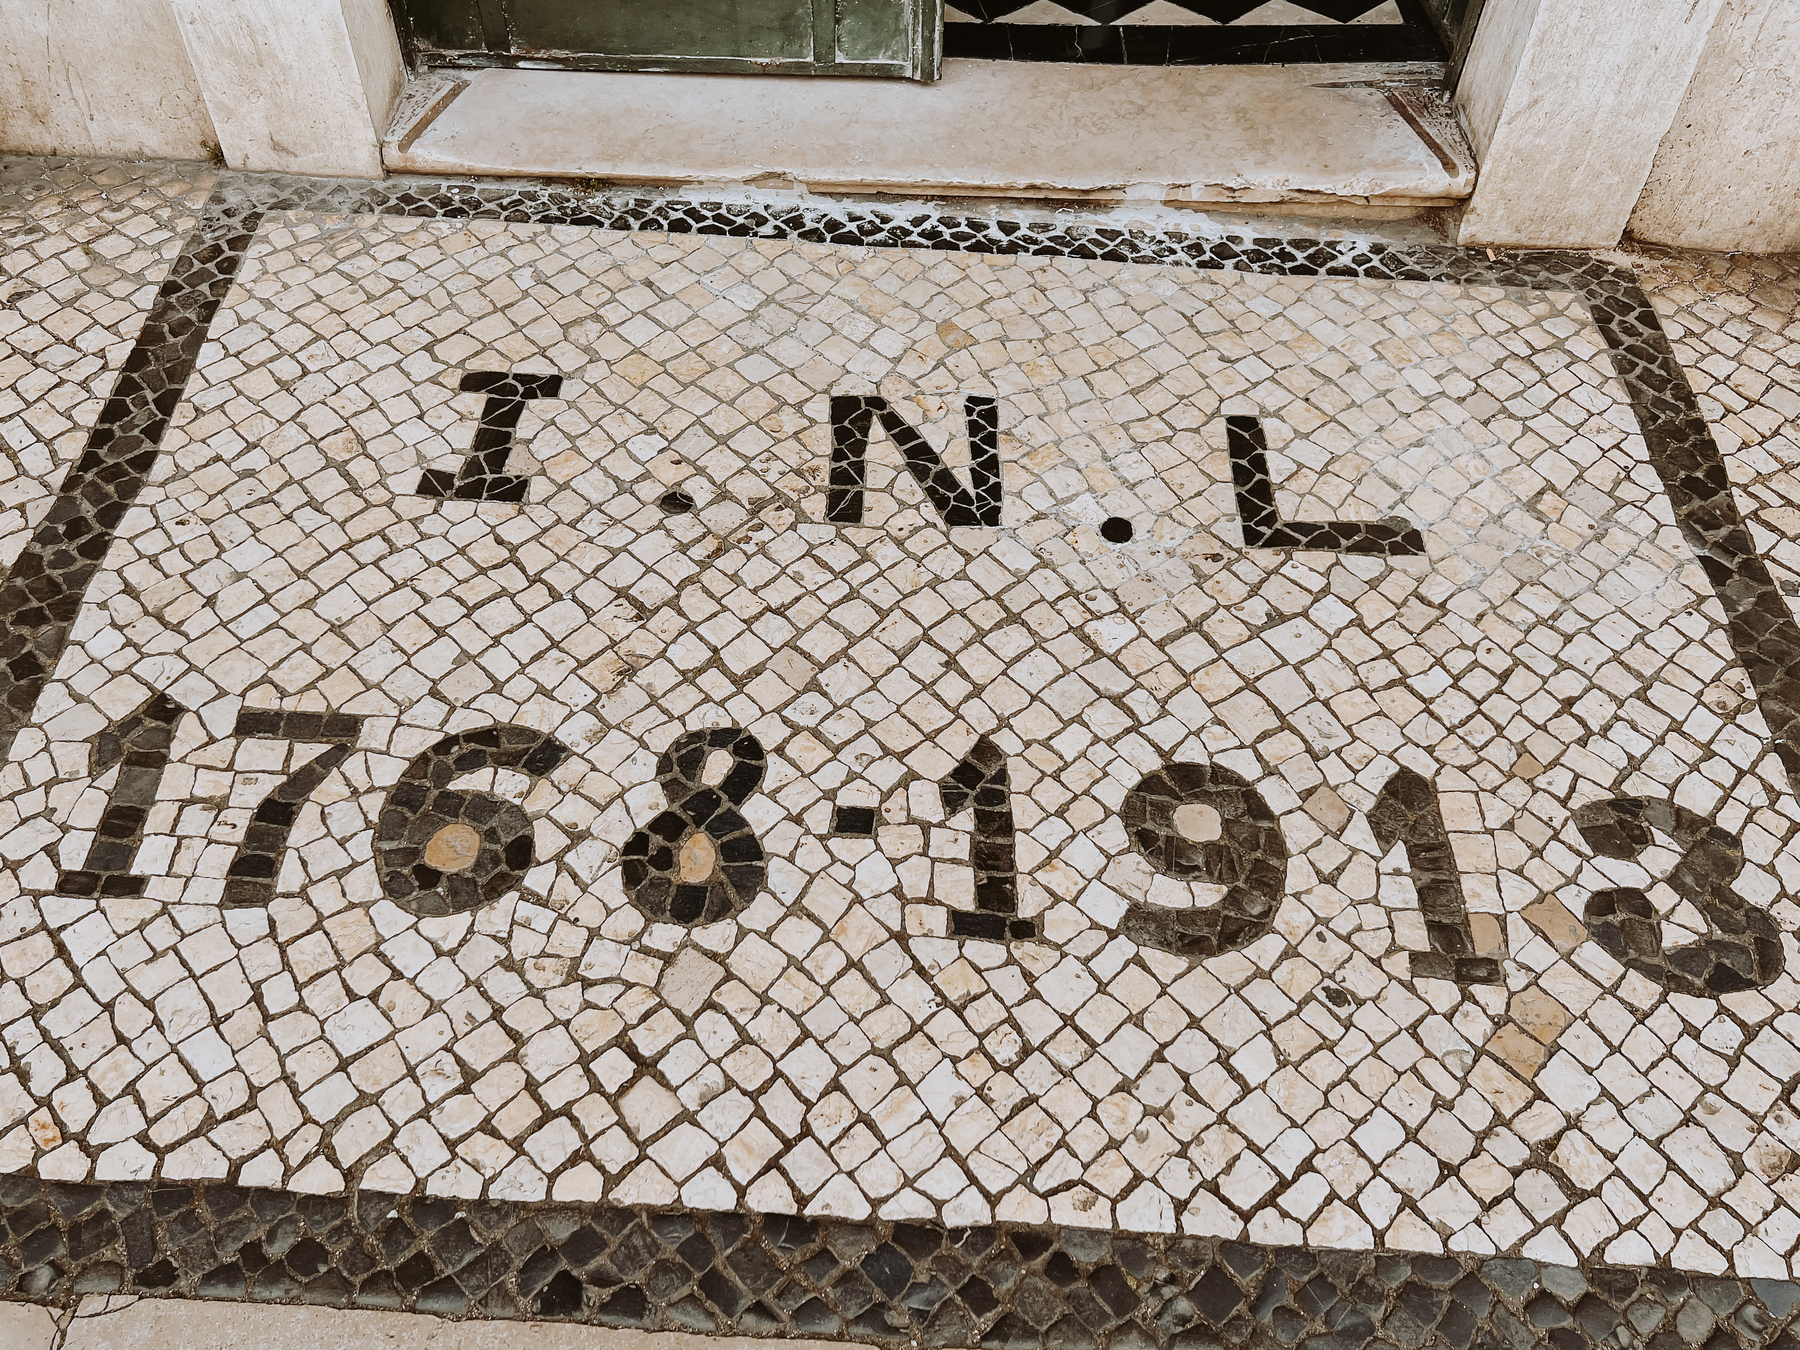 Looking down on a sidewalk, with Portuguese calçada. Simple one, with “I.N.L 1768-1913” written on the floor. 